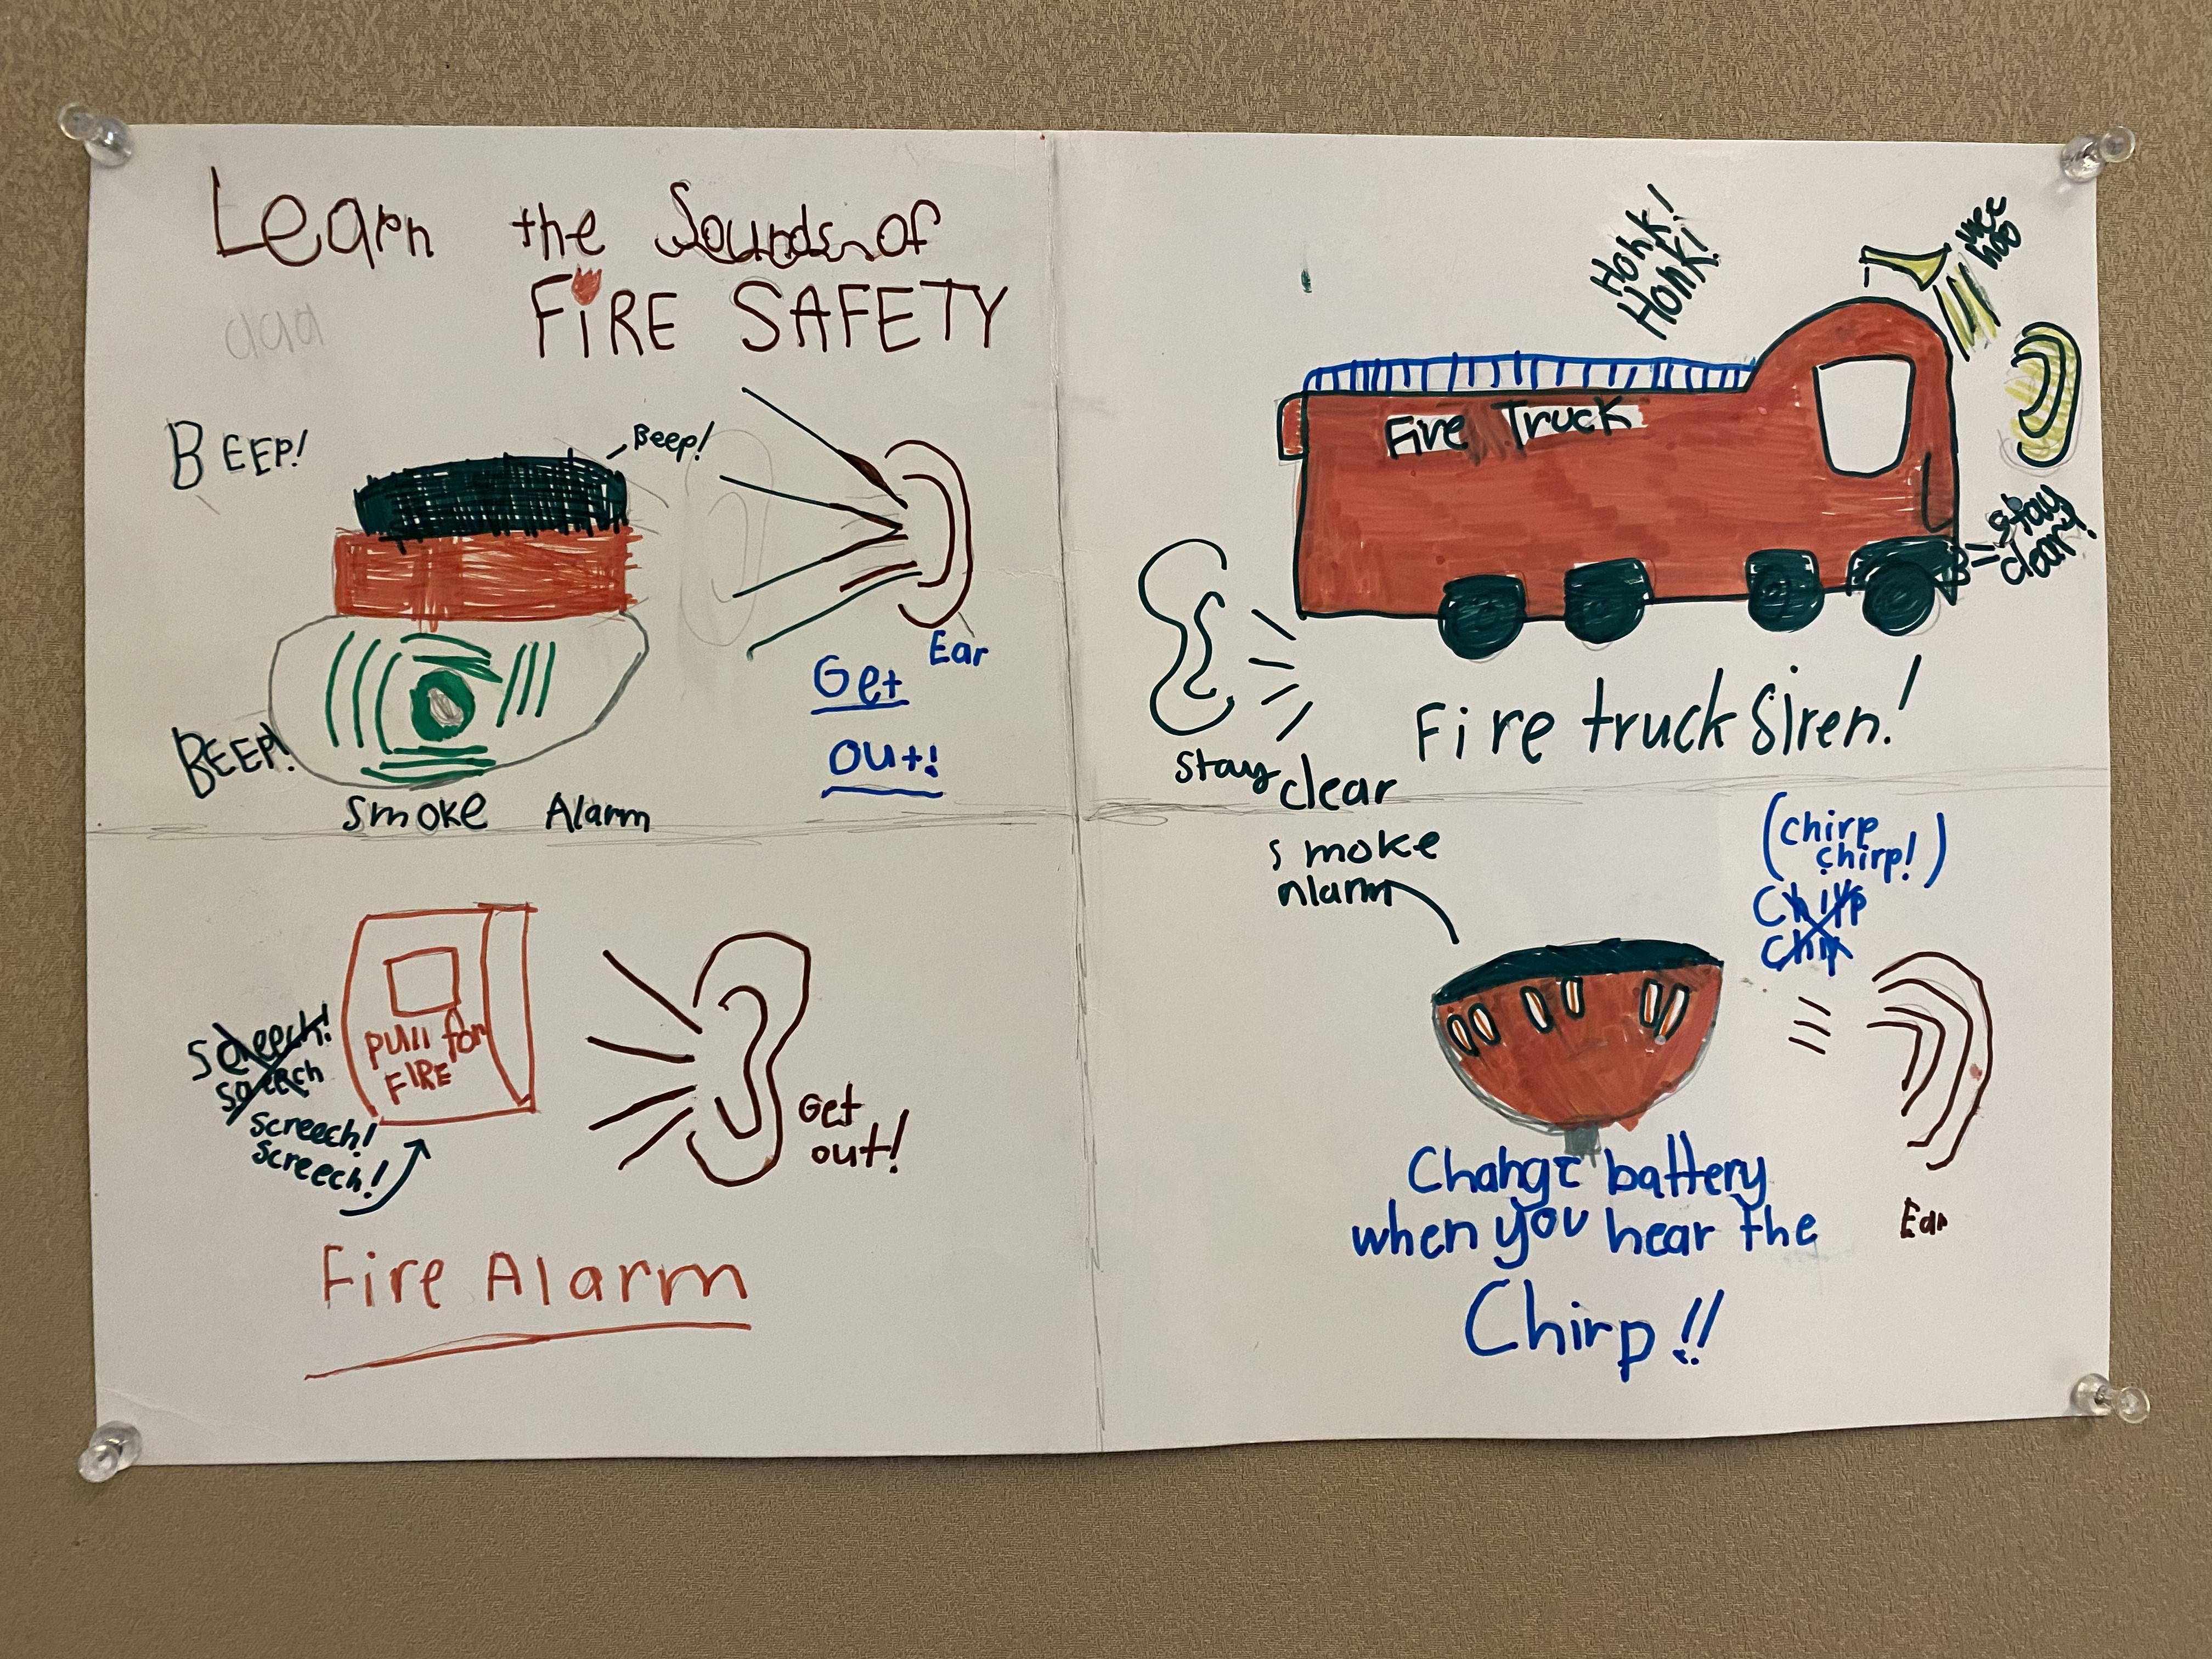 2021 MSFCA Poster Contest Sponsored by the National Fire Sprinkler